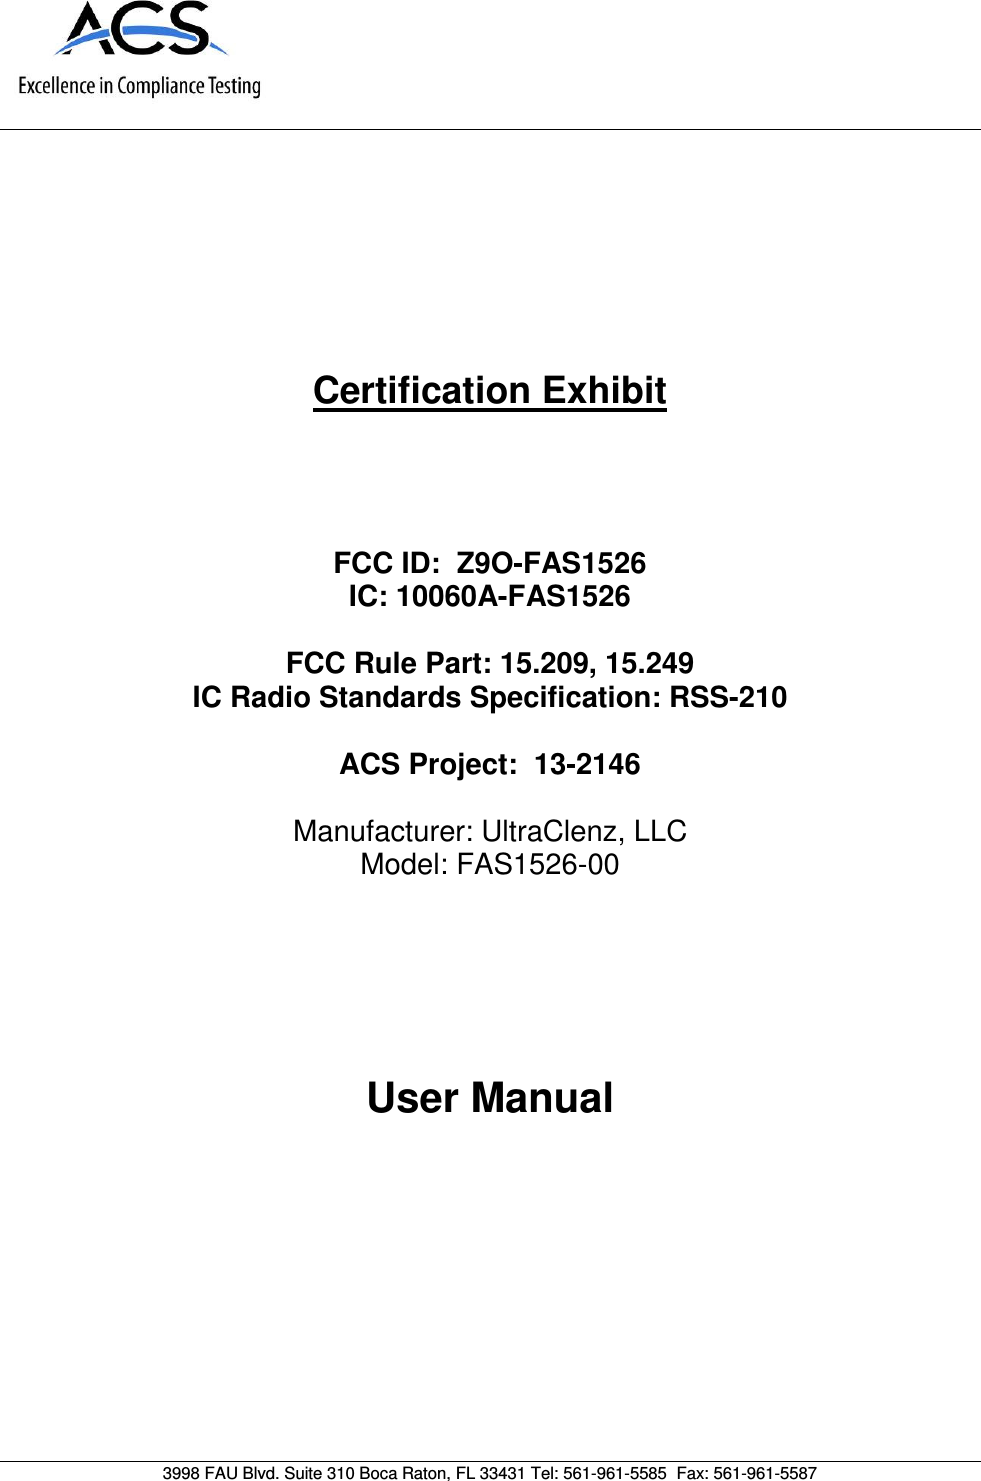      Certification Exhibit     FCC ID:  Z9O-FAS1526 IC: 10060A-FAS1526  FCC Rule Part: 15.209, 15.249 IC Radio Standards Specification: RSS-210  ACS Project:  13-2146   Manufacturer: UltraClenz, LLC Model: FAS1526-00     User Manual   3998 FAU Blvd. Suite 310 Boca Raton, FL 33431 Tel: 561-961-5585  Fax: 561-961-5587 